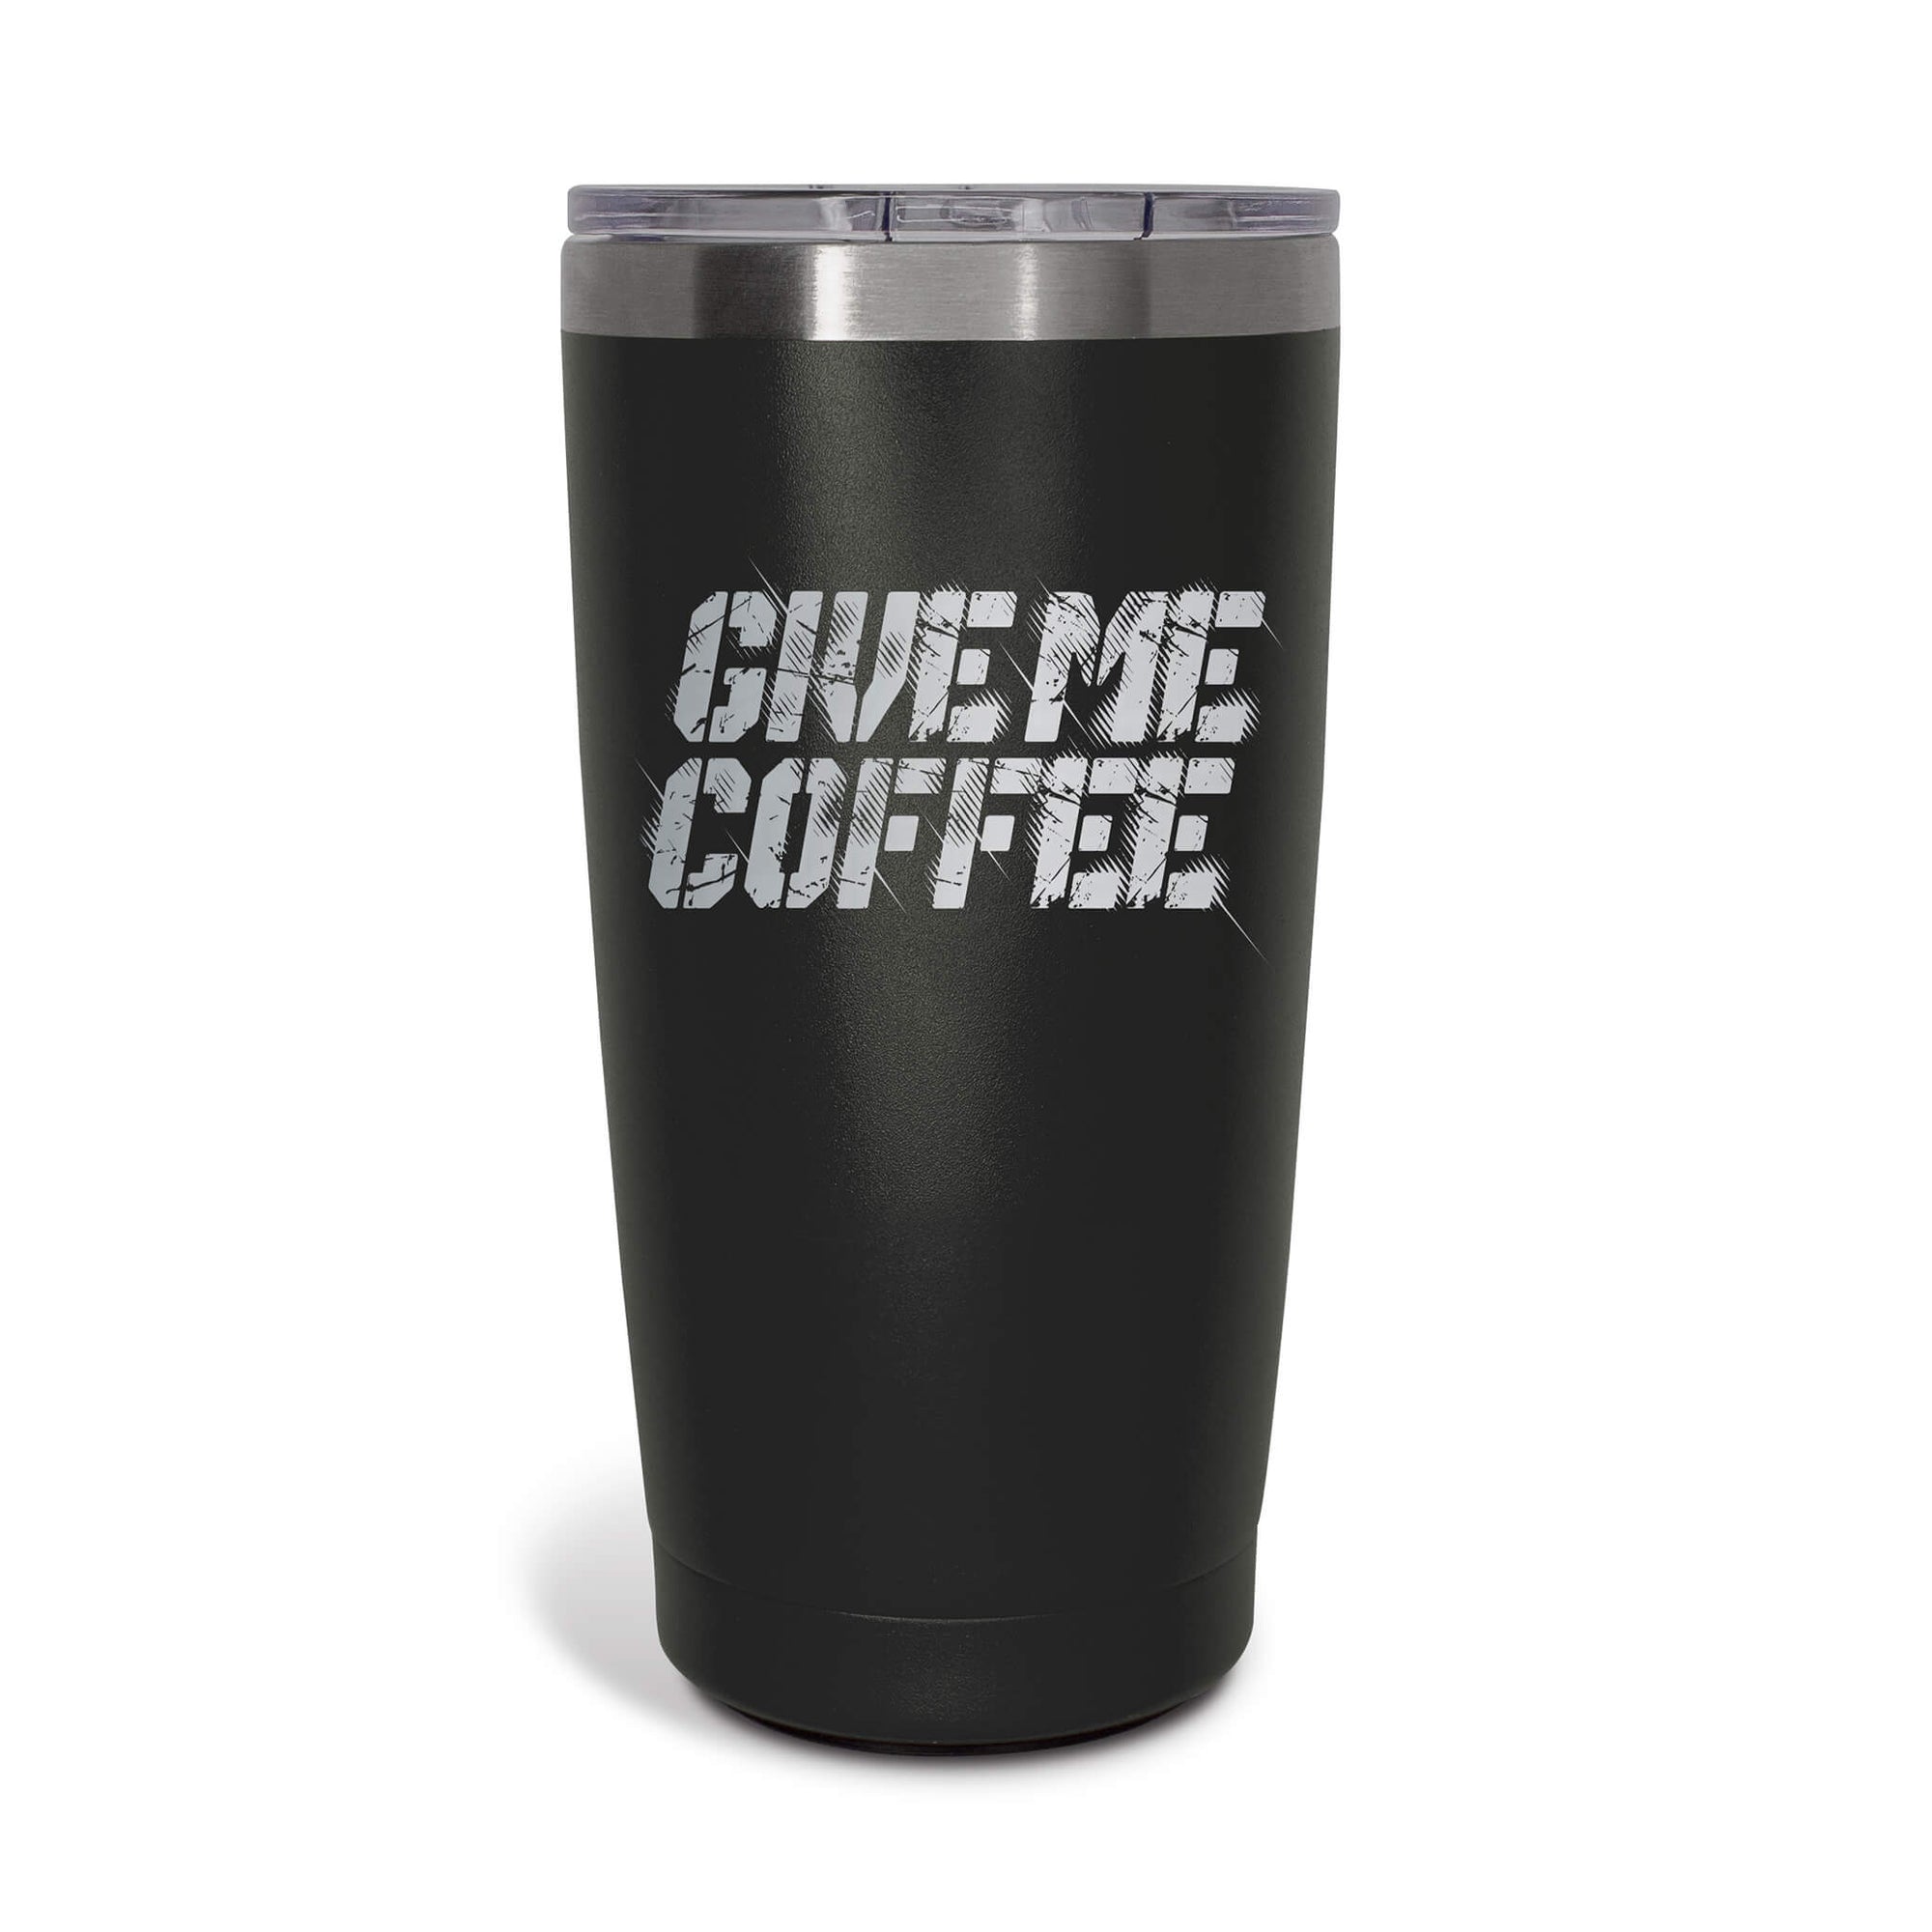 A 20 ounce black tumbler that says GIVE ME COFFEE on the front